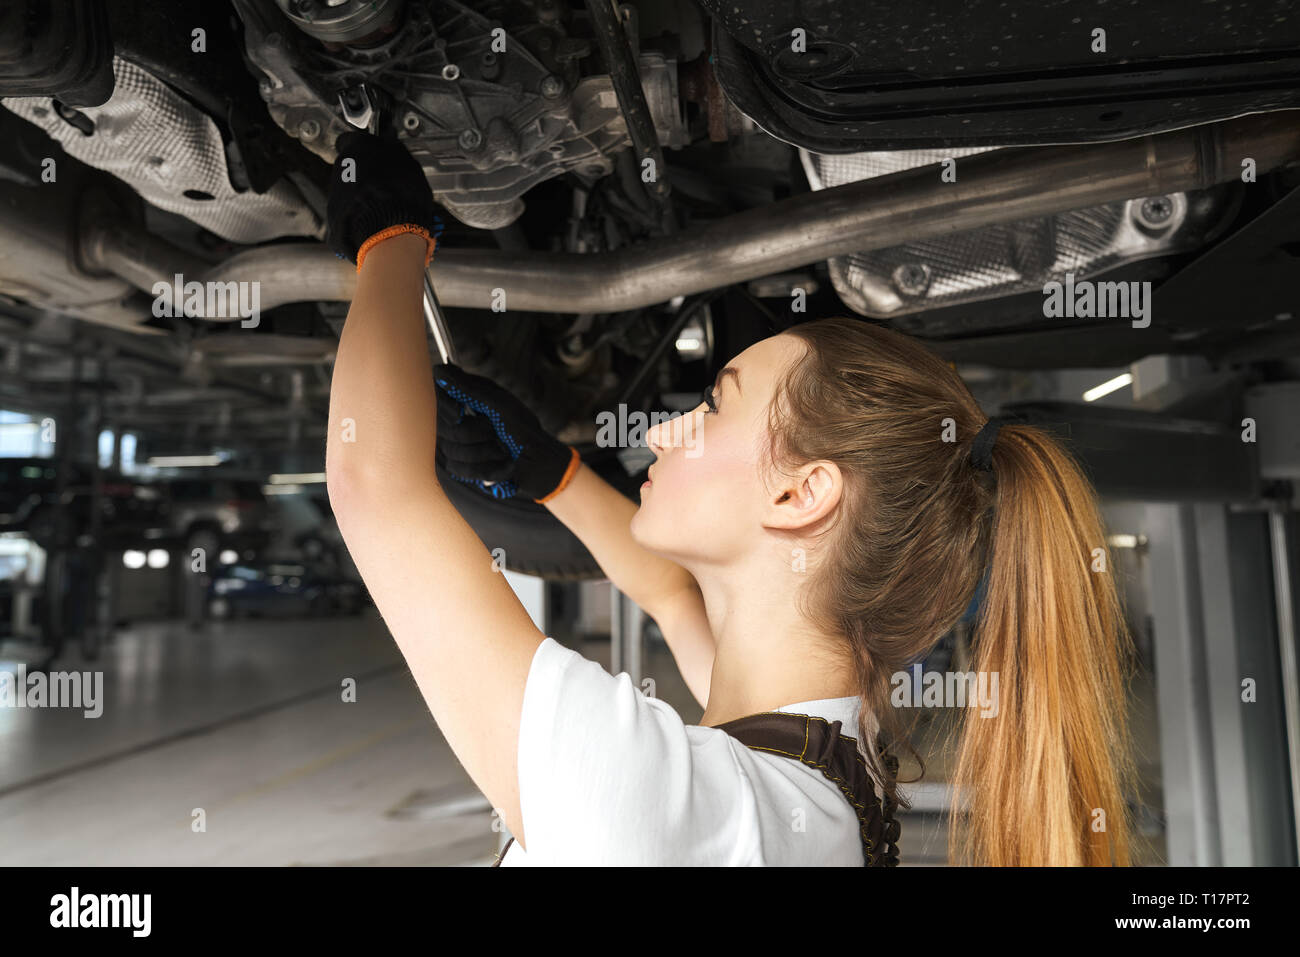 Young woman holding tool, fixing car. Girl working undercarriage of automobile, auto lifted on bridge. Female mechanic in black gloves looking up, repairing vehicle in service station. Stock Photo